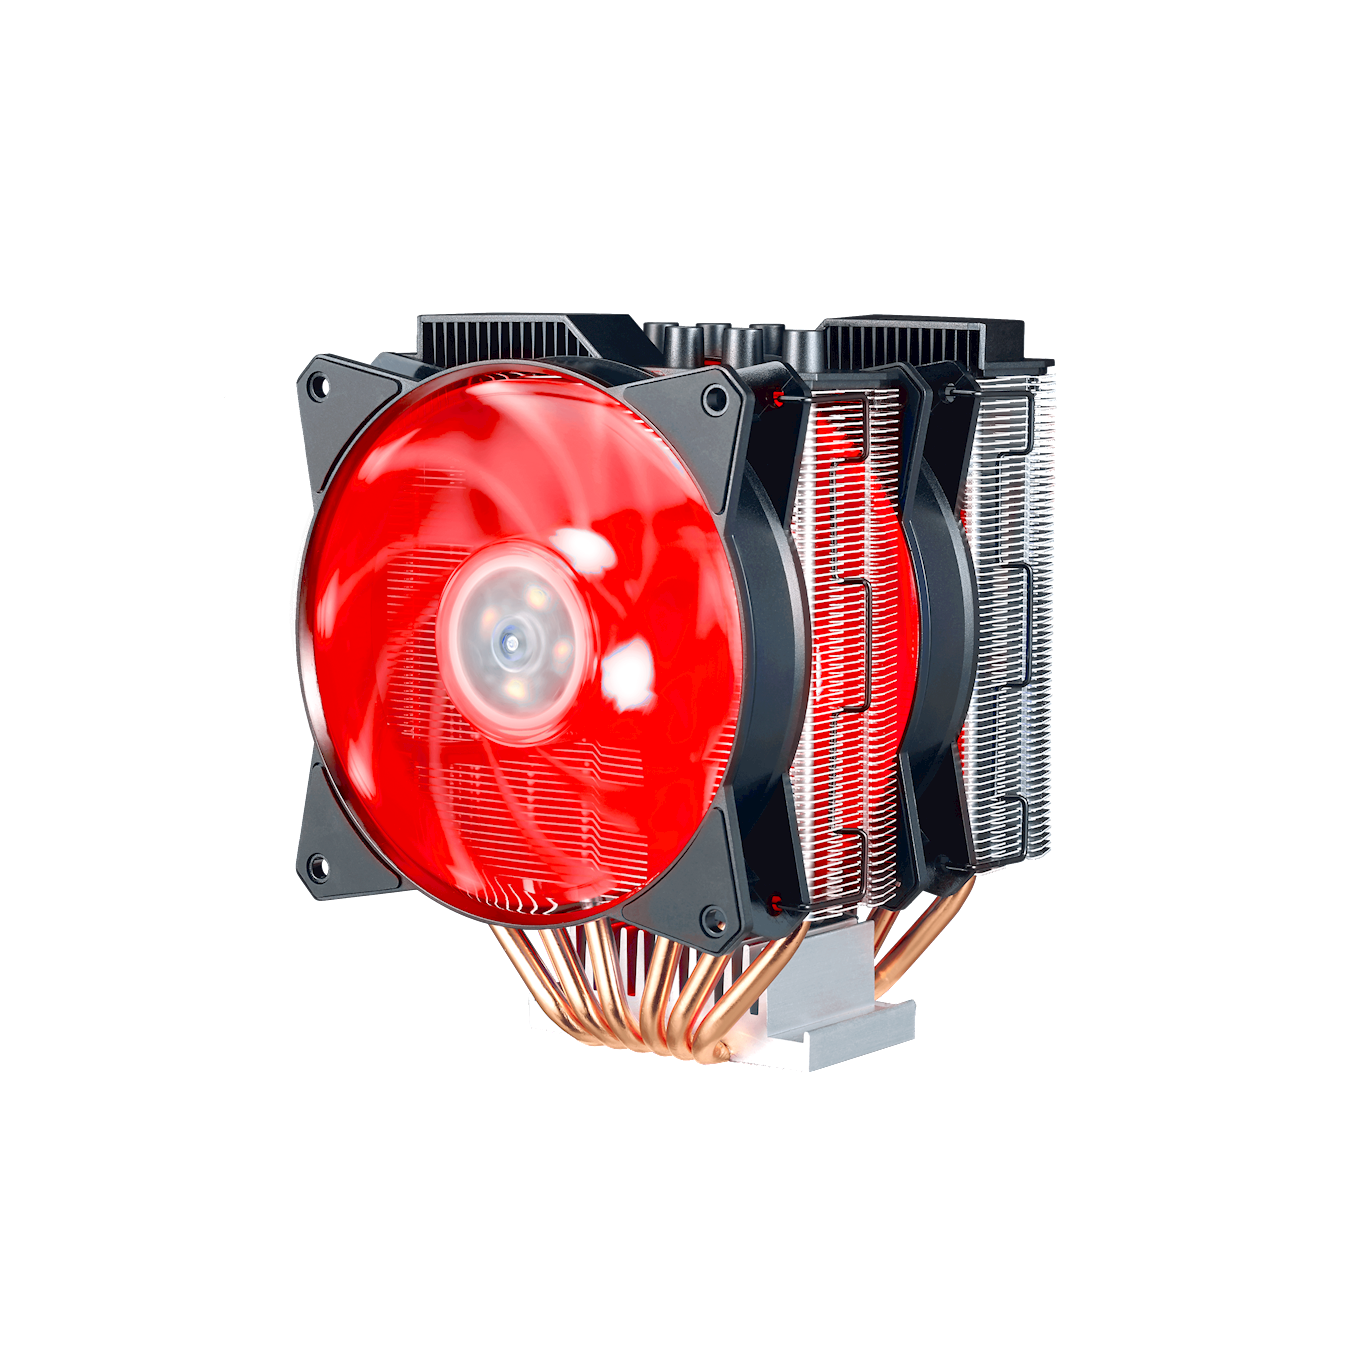 With two MasterFan MF120R RGB fans, the MasterAir MA620P is ready for more than 16.7 million color options and tons of fun effects.